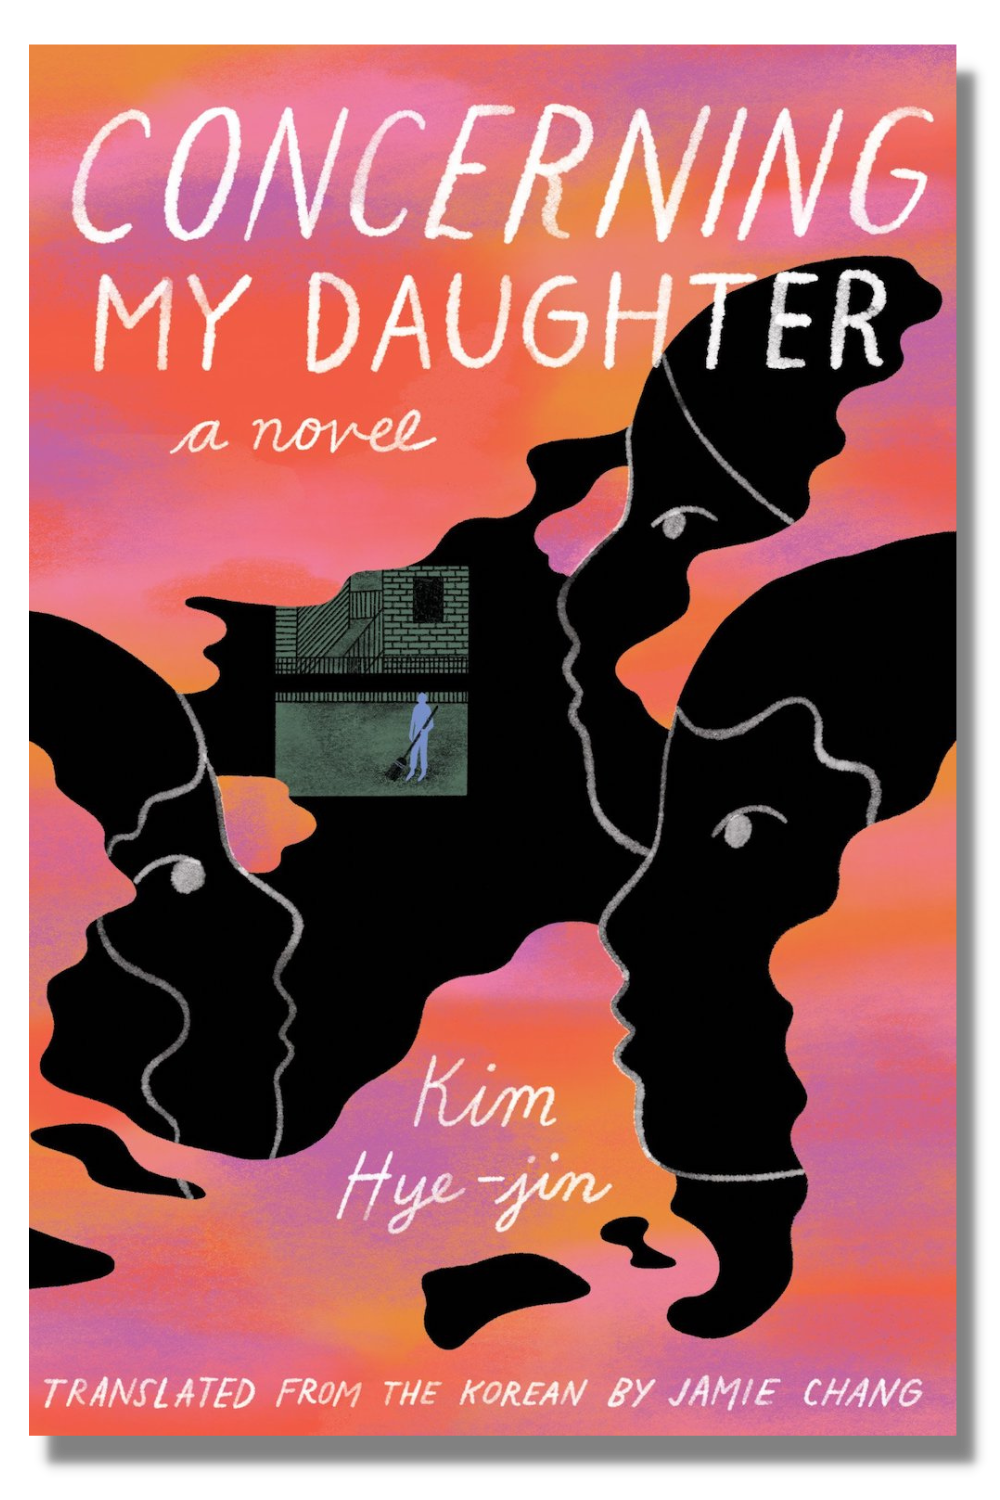 The cover of Kim Hye-jin's "Concerning My Daughter," tr. Jamie Chang